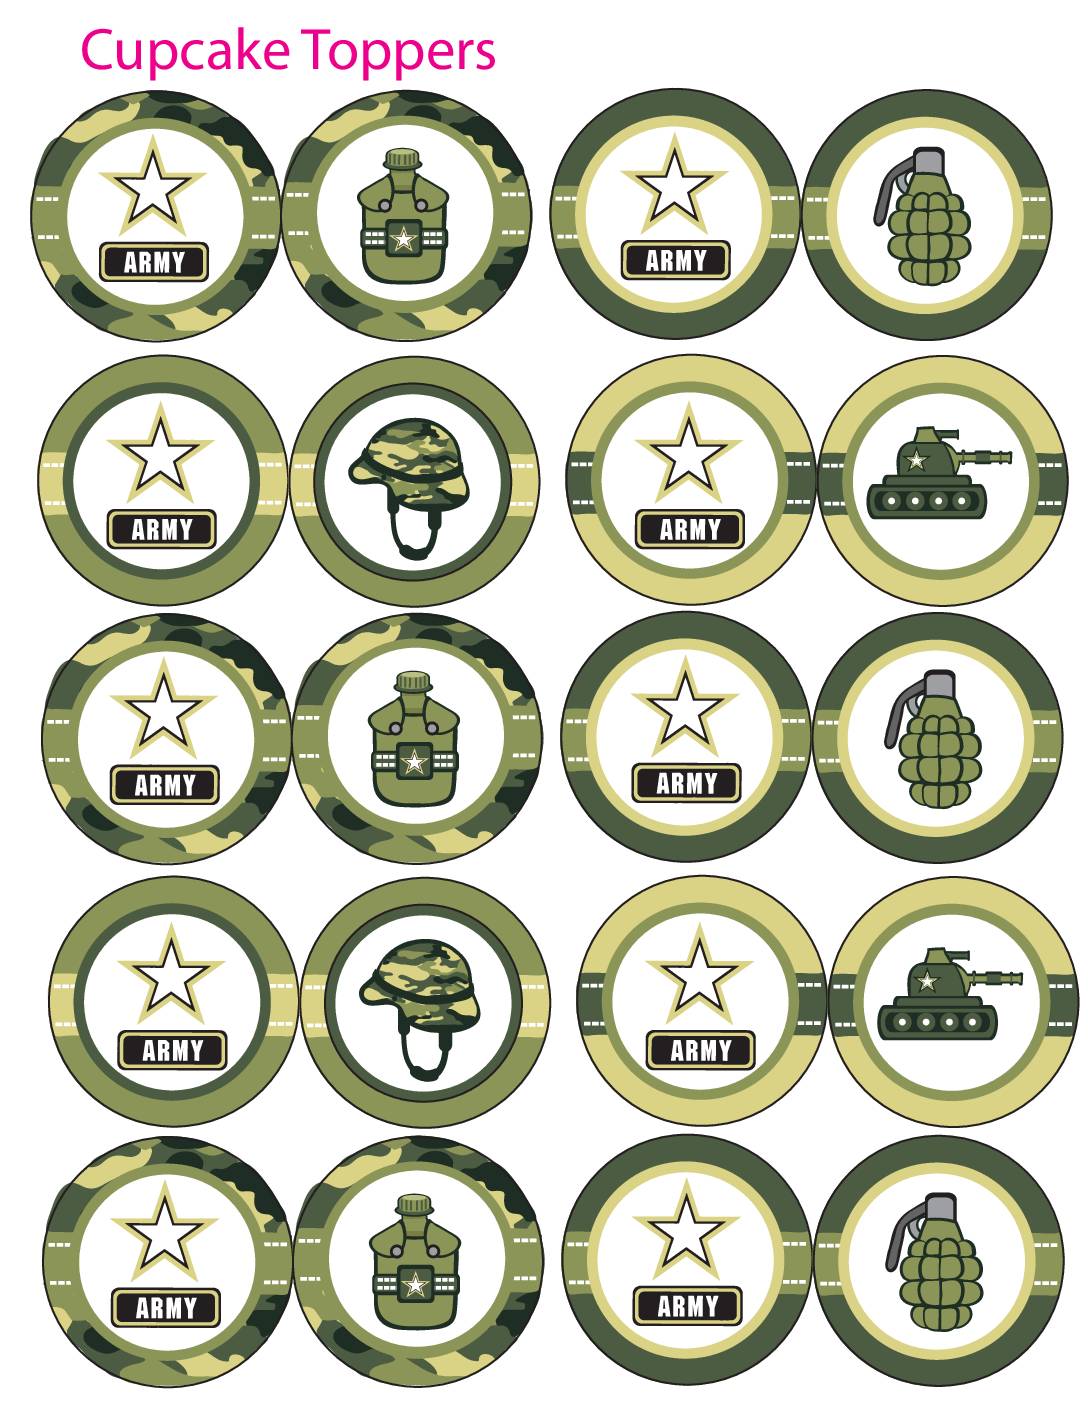 Cupcake Toppers army  pdf